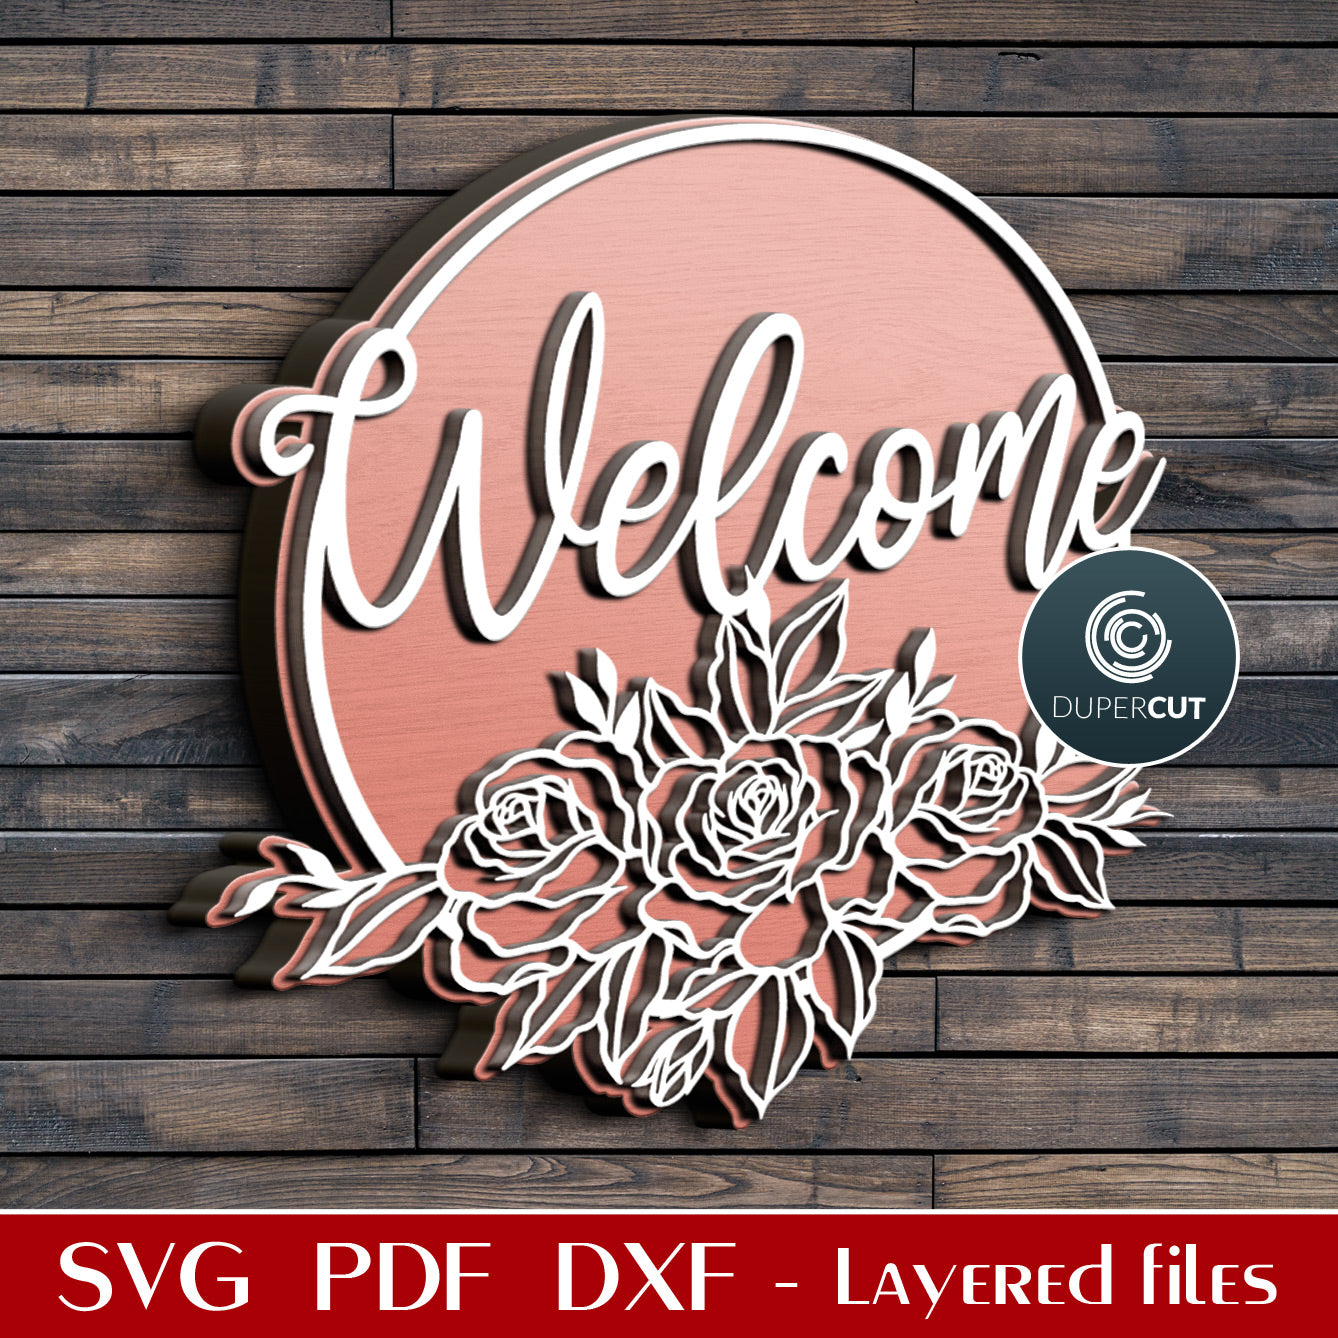 Roses bouquet welcome sign - add custom name - SVG DXF vector files pattern for Glowforge, Cricut, Silhouette, CNC plasma machines by DuperCut.com